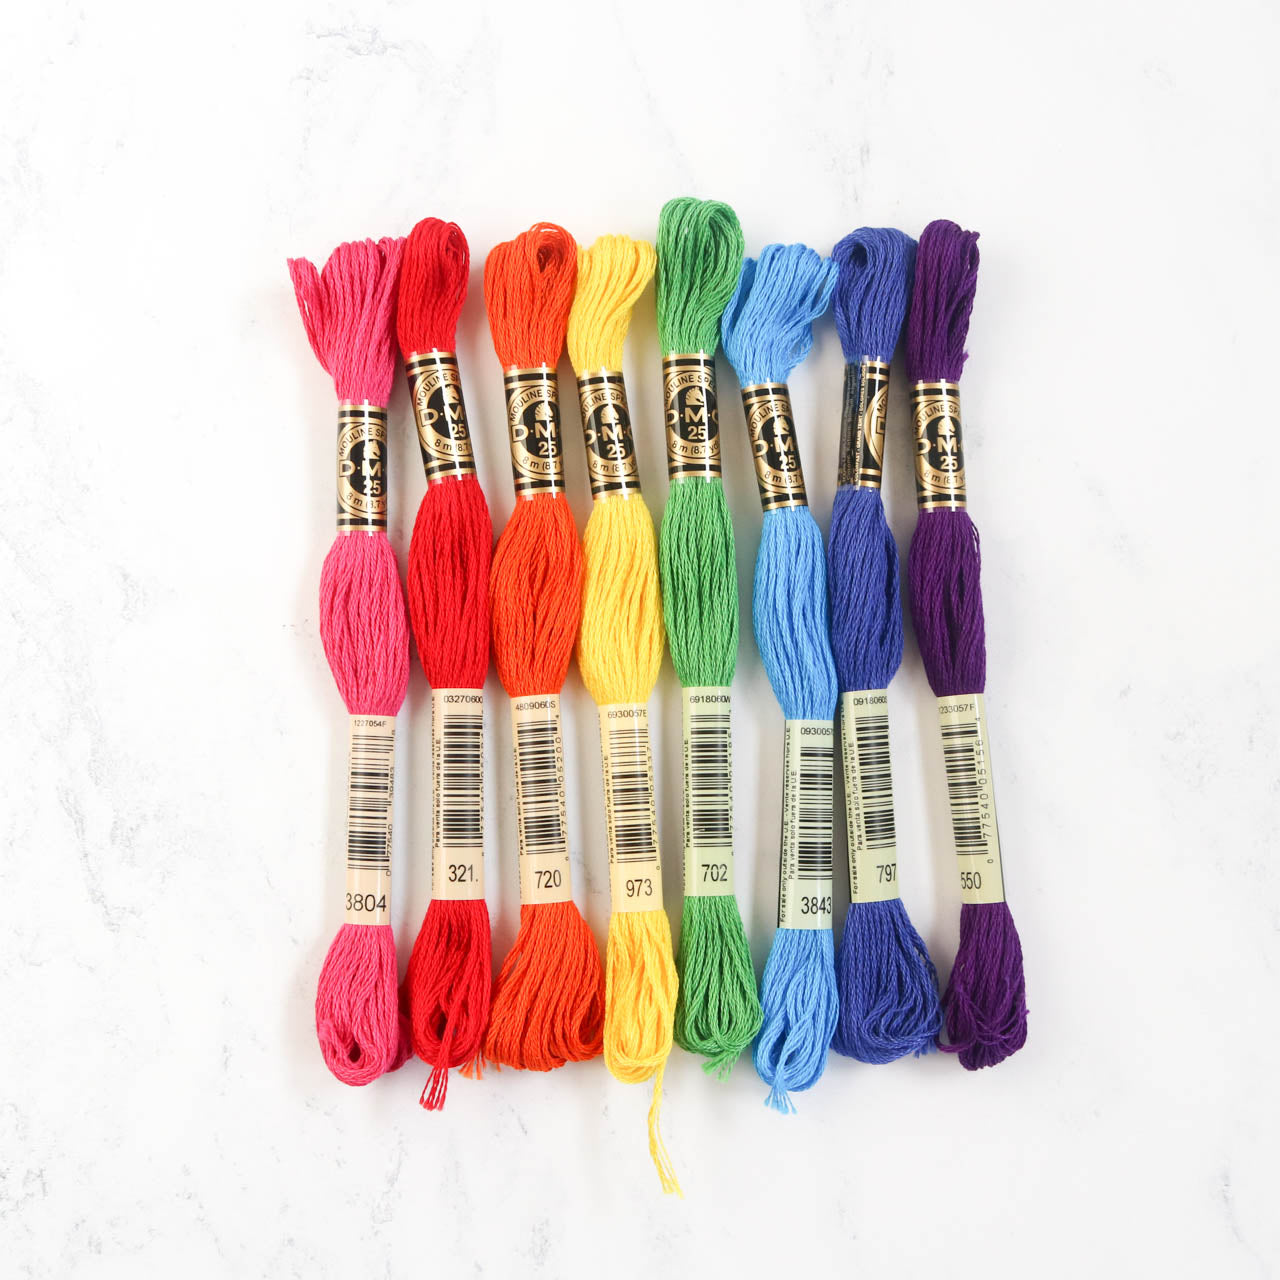 Essentials By Leisure Arts Arts Embroidery Floss Pack 117pc Jumbo